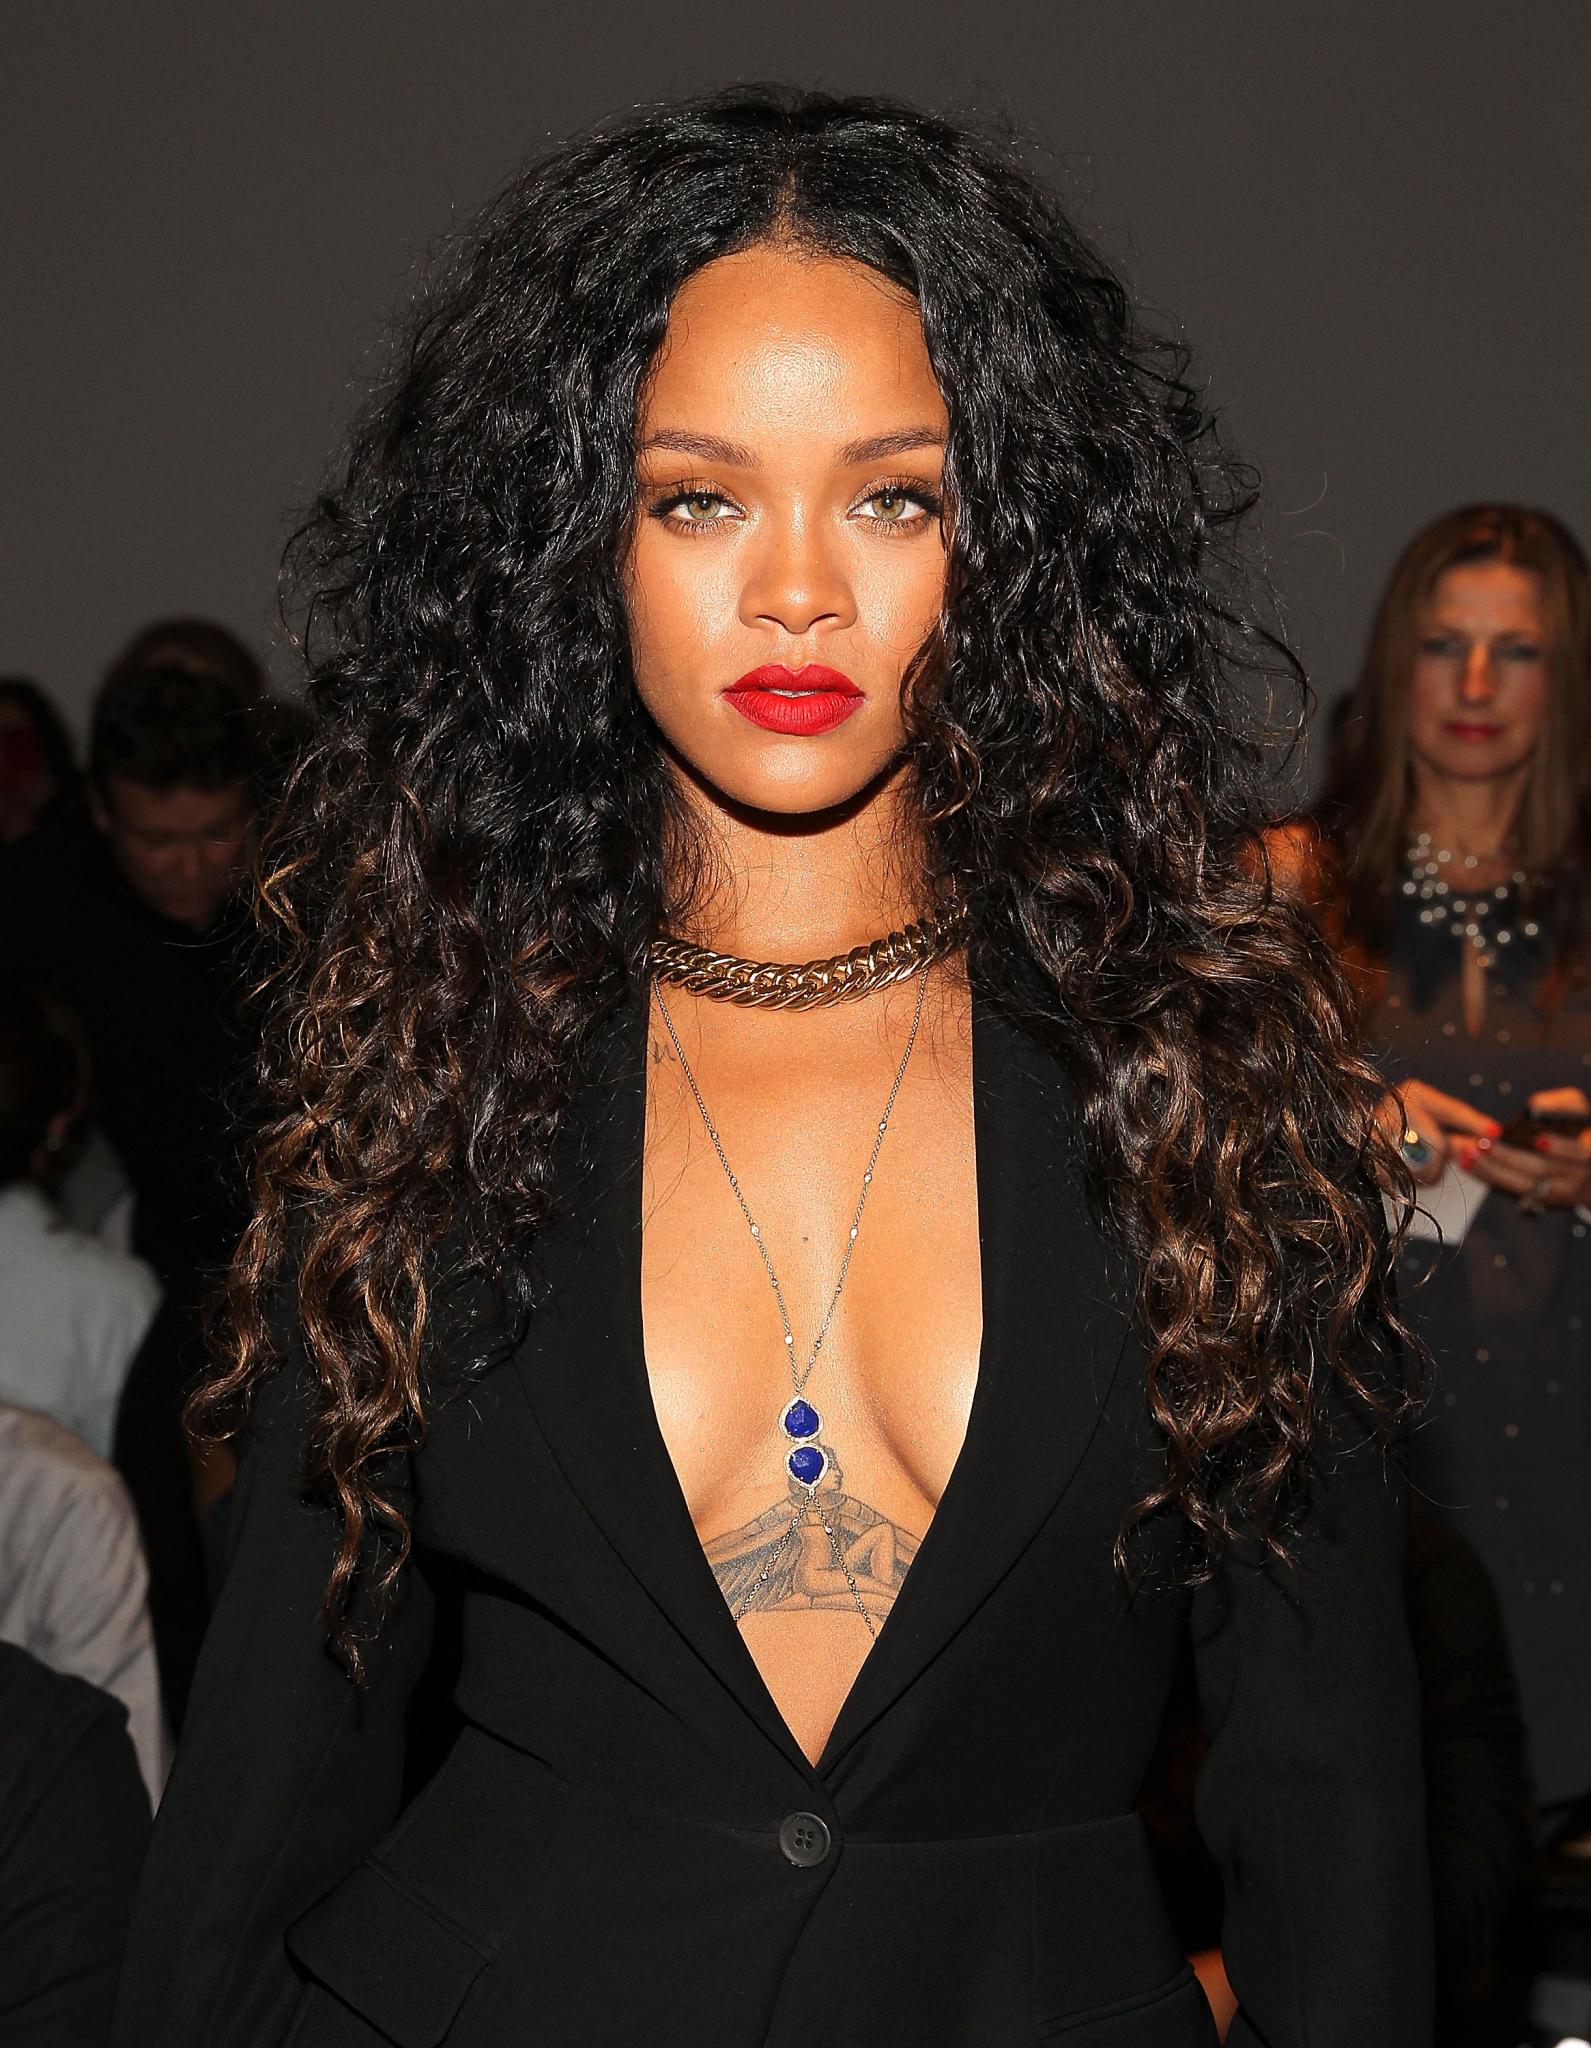 25 Reasons Rihanna Is the Ultimate Hair Muse
